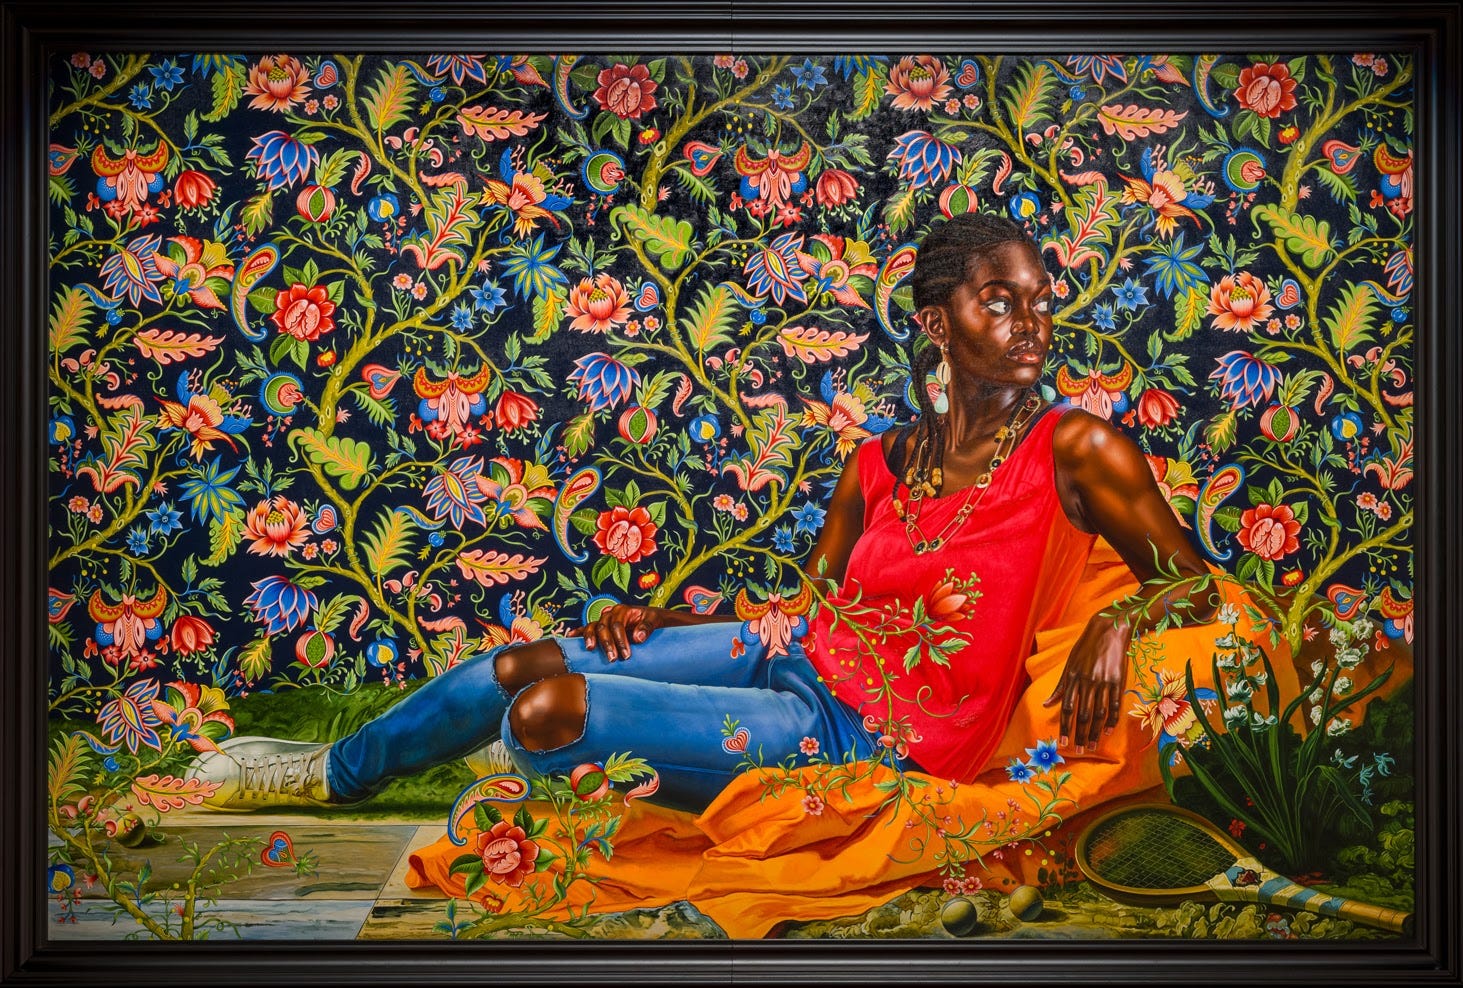 Kehinde Wiley, “The Death of Hyacinth (Ndey Buri Mboup)”, 2022 Oil on canvas. Courtesy of the artist and Templon, Paris — Brussels — New York. Photo: Ugo Carmeni.